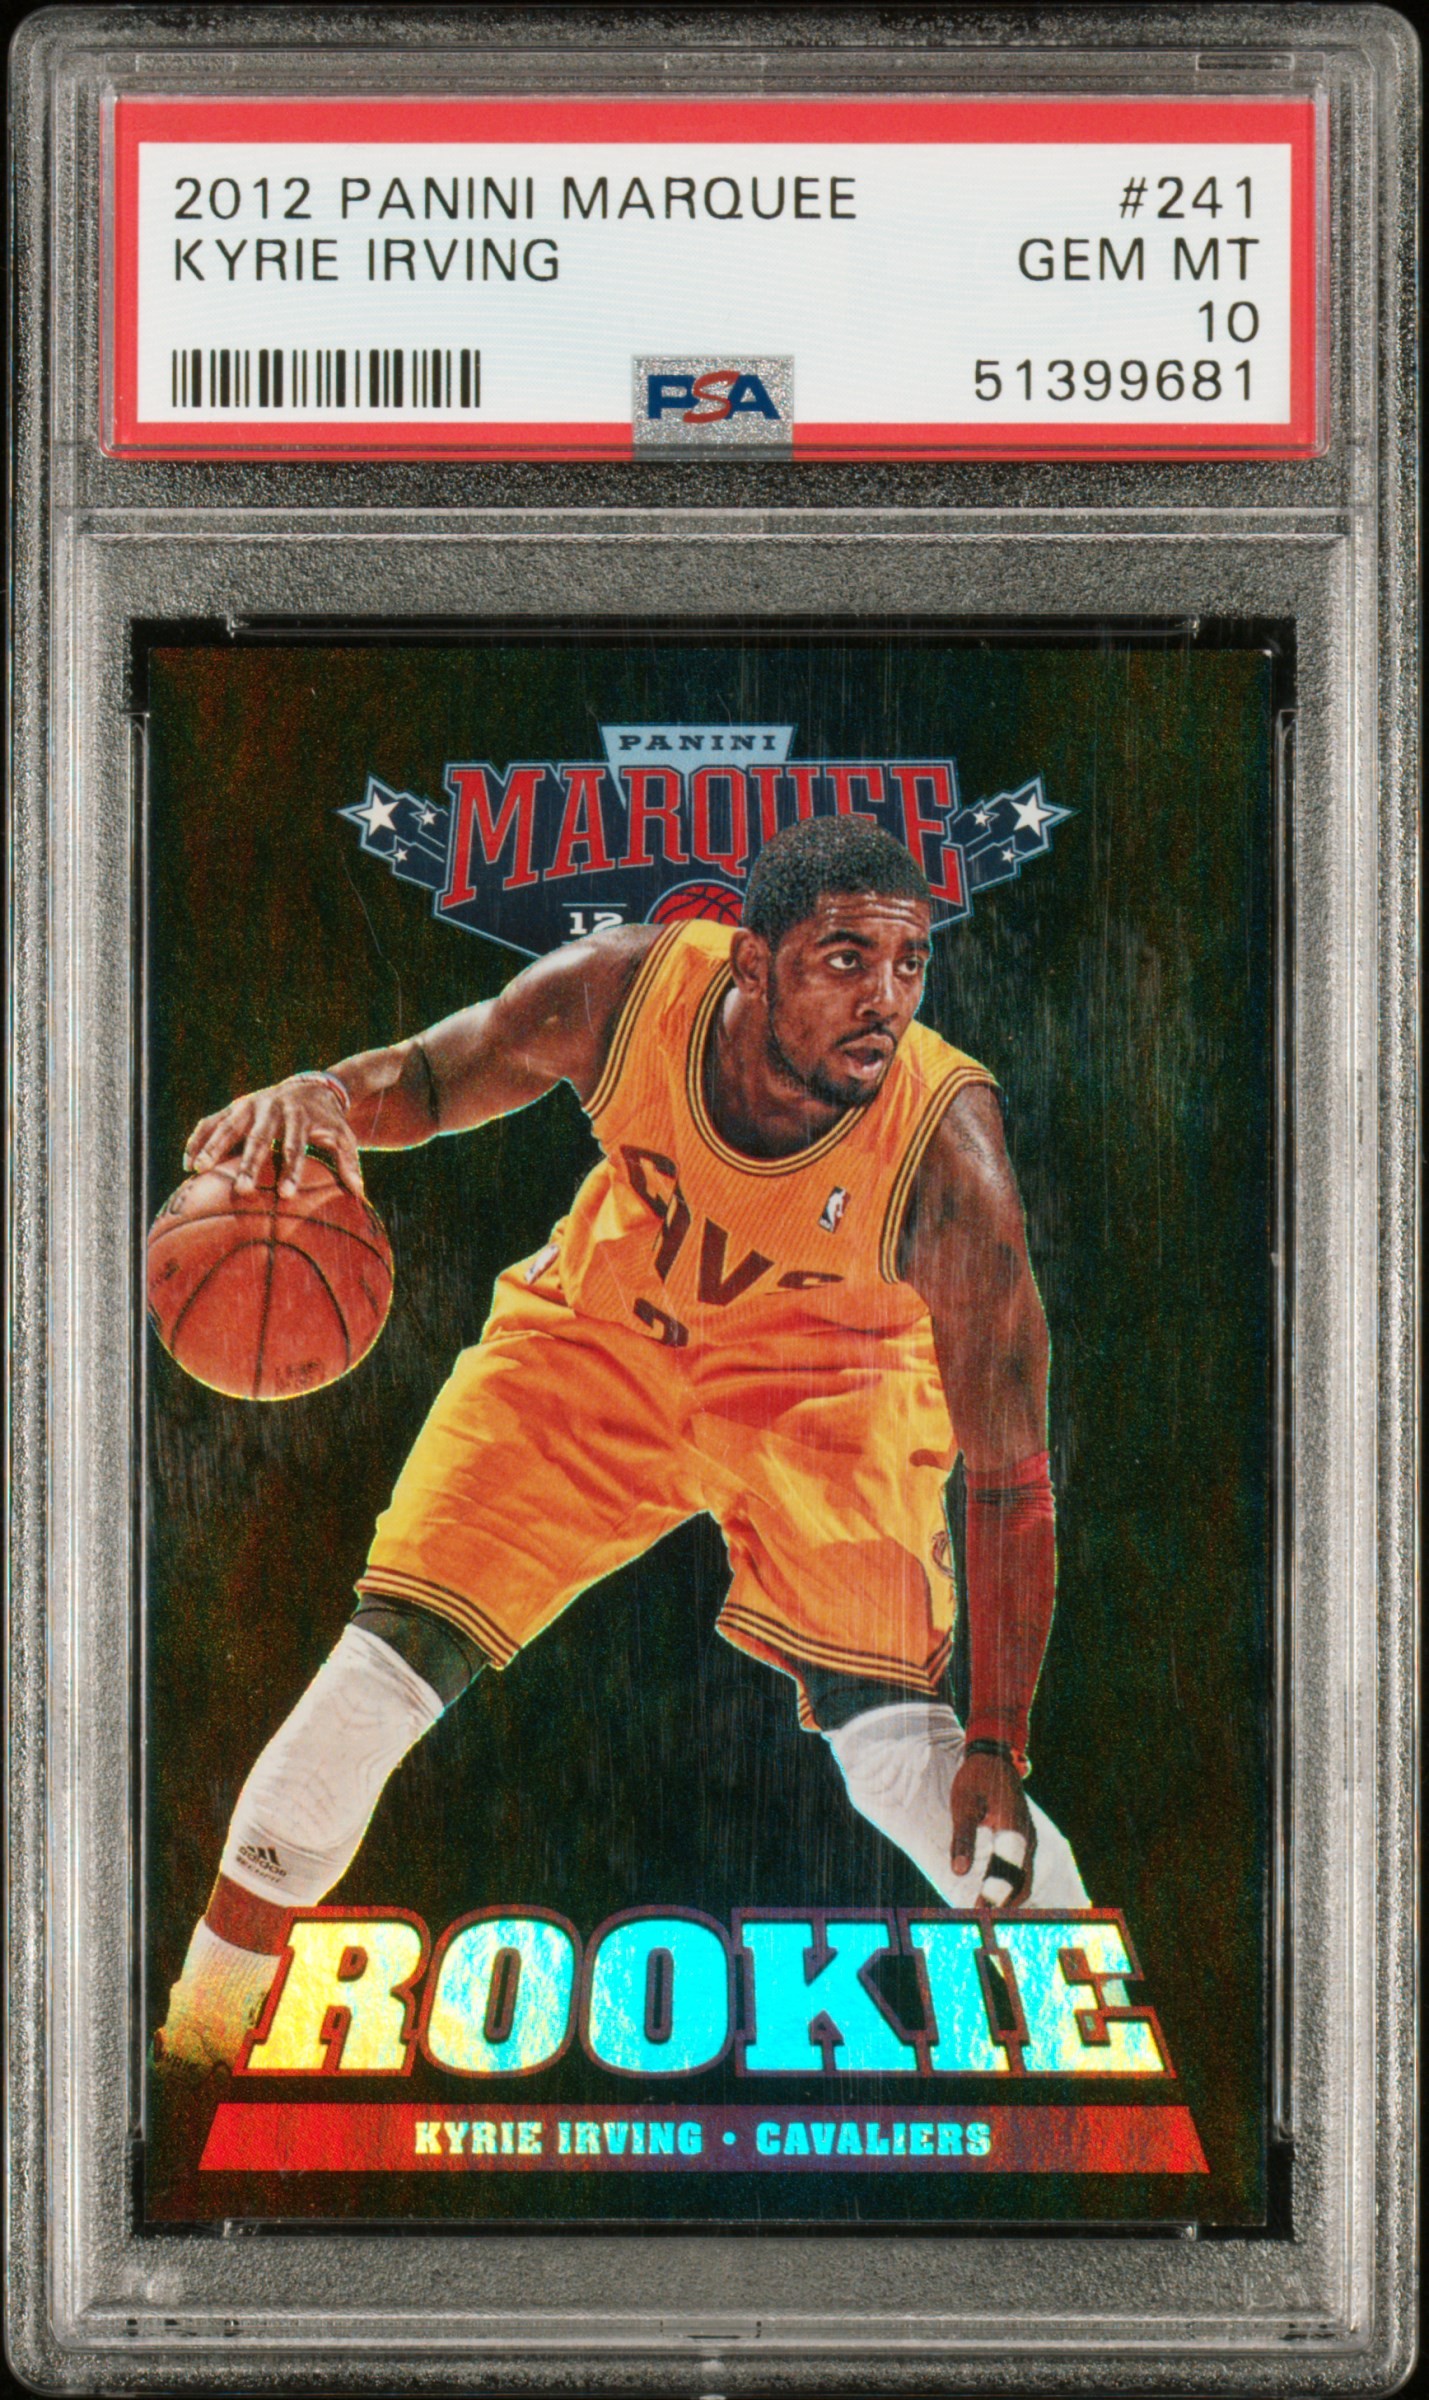 2012 Panini Marquee 241 Kyrie Irving Rookie Card – PSA GEM MT 10